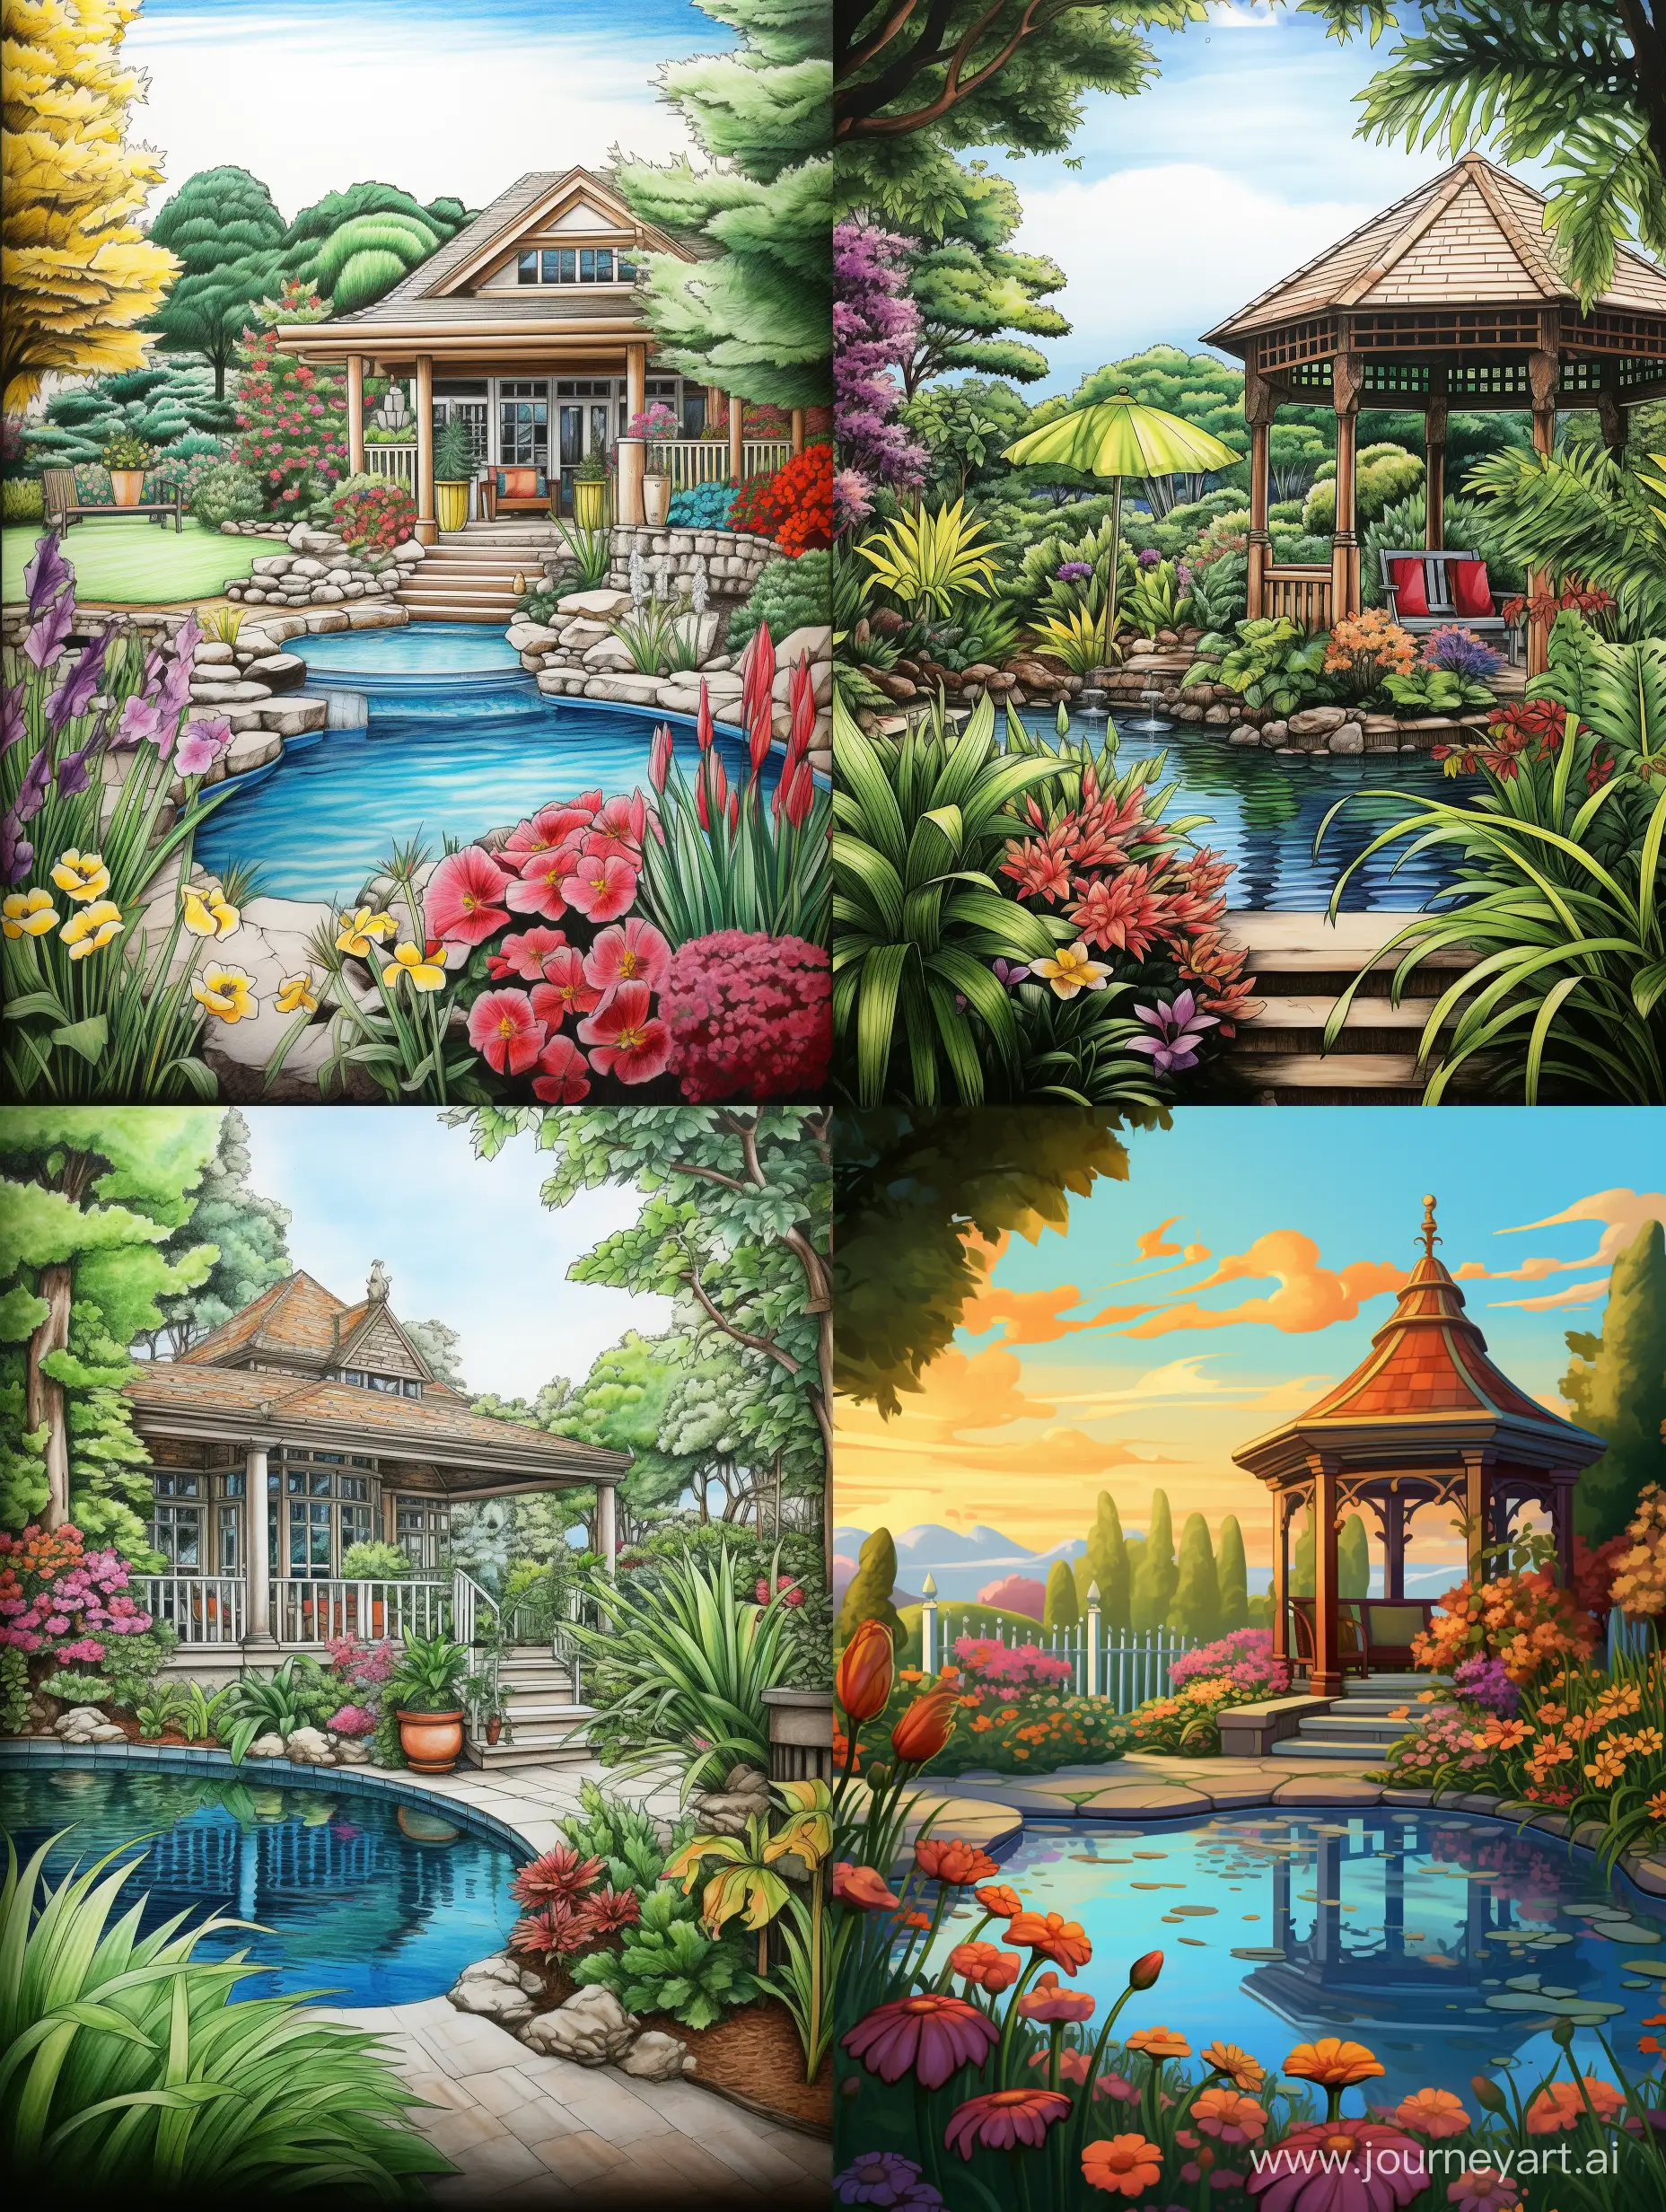 Tranquil-Garden-Oasis-with-Gazebo-and-Pool-Serene-Landscape-Art